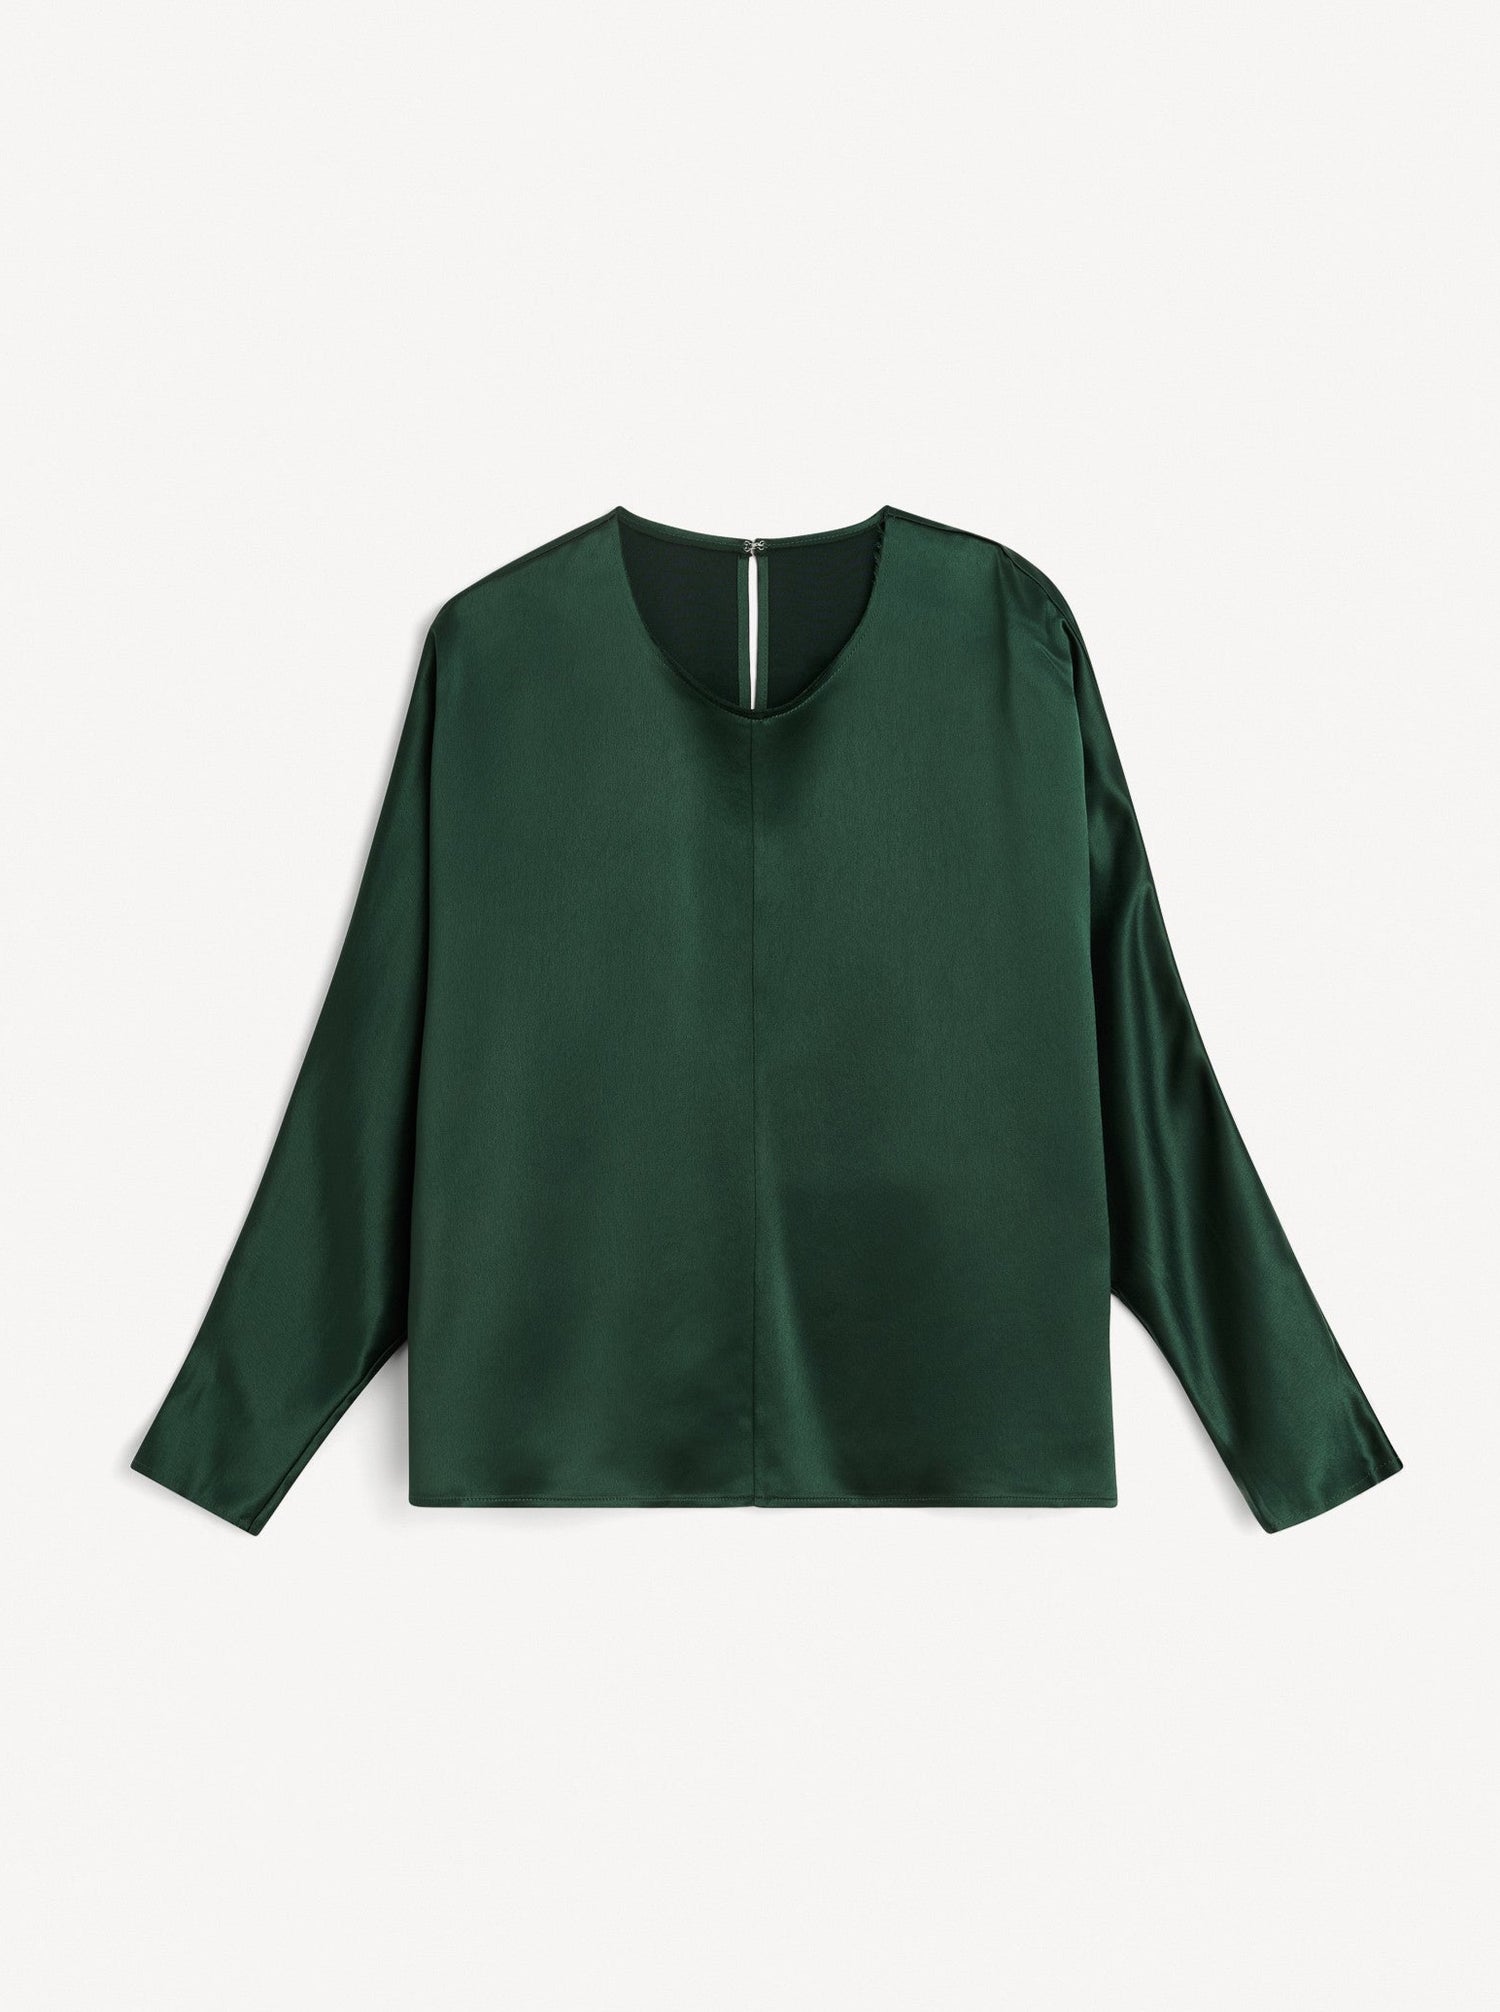 ODELLEYS shirt, sycamore green